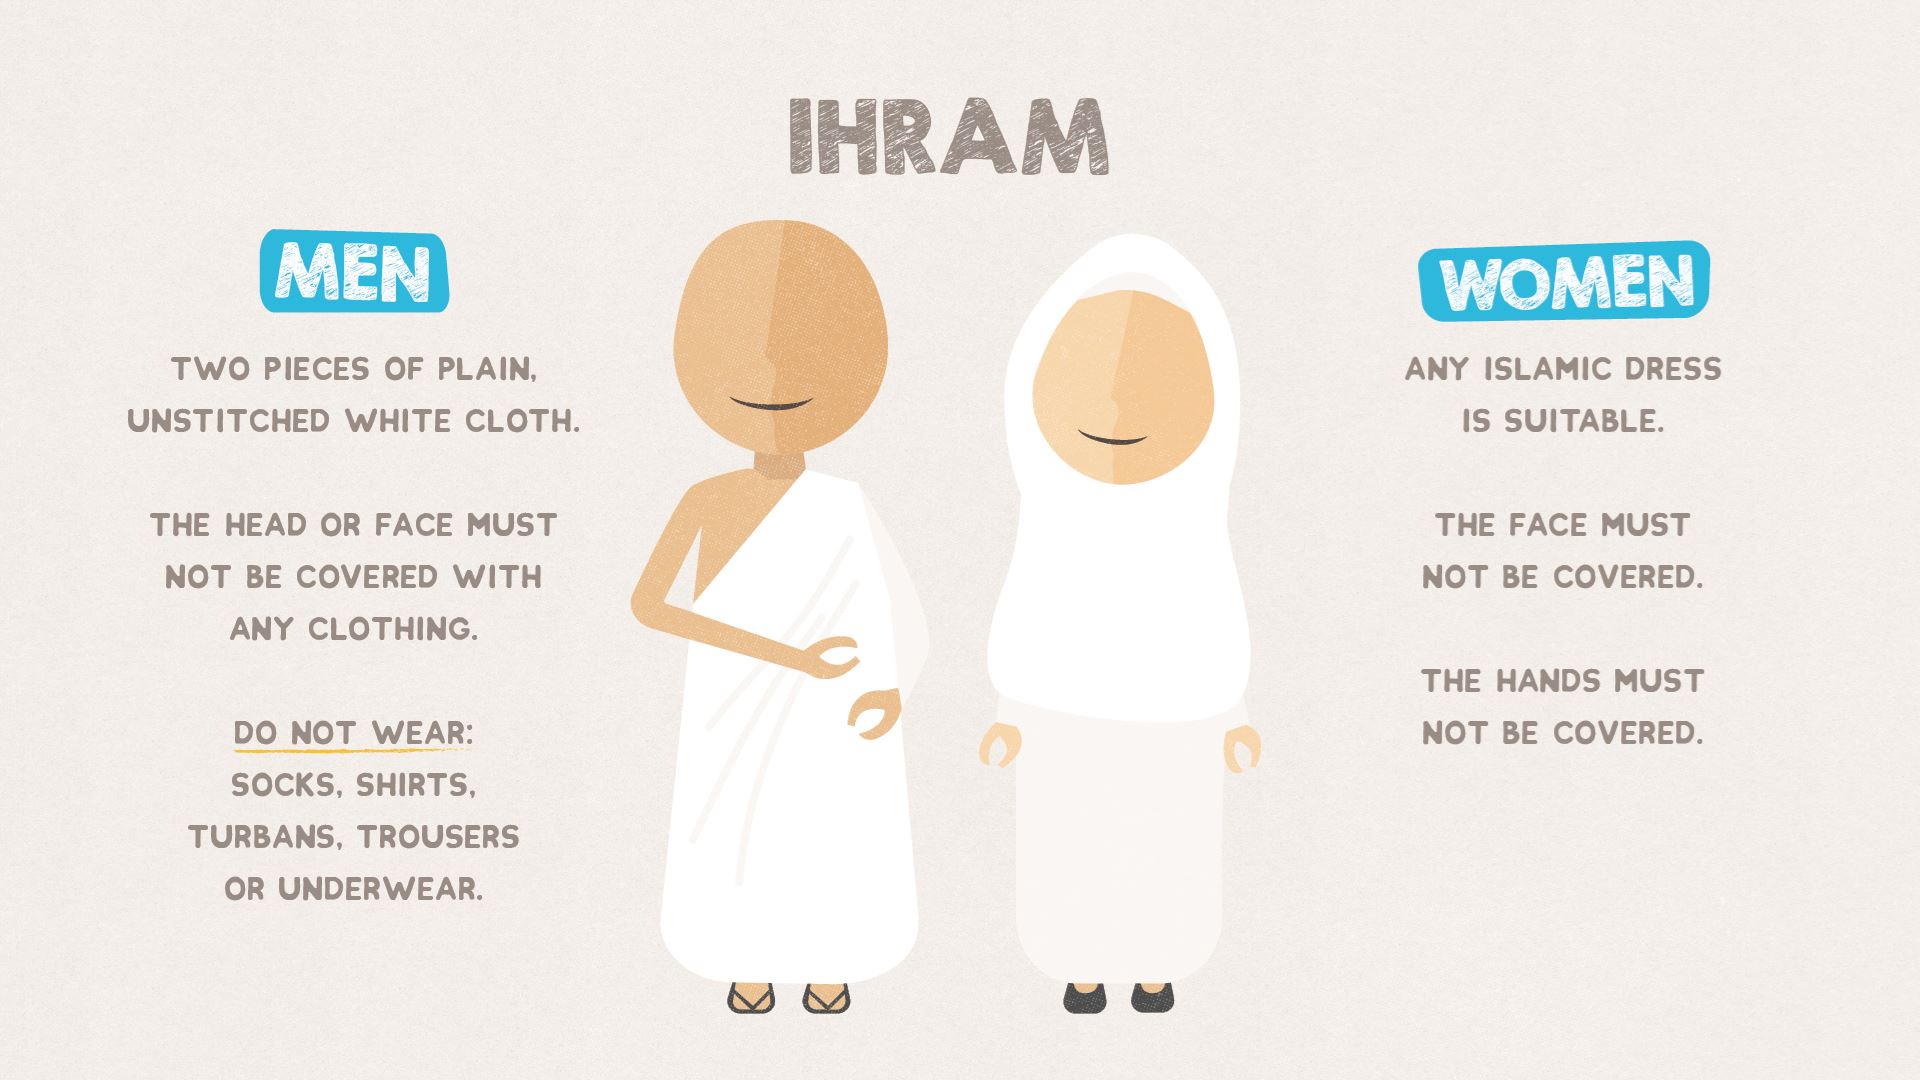 How To Perform Umrah A Step By Step Guide For Muslims, 41 OFF